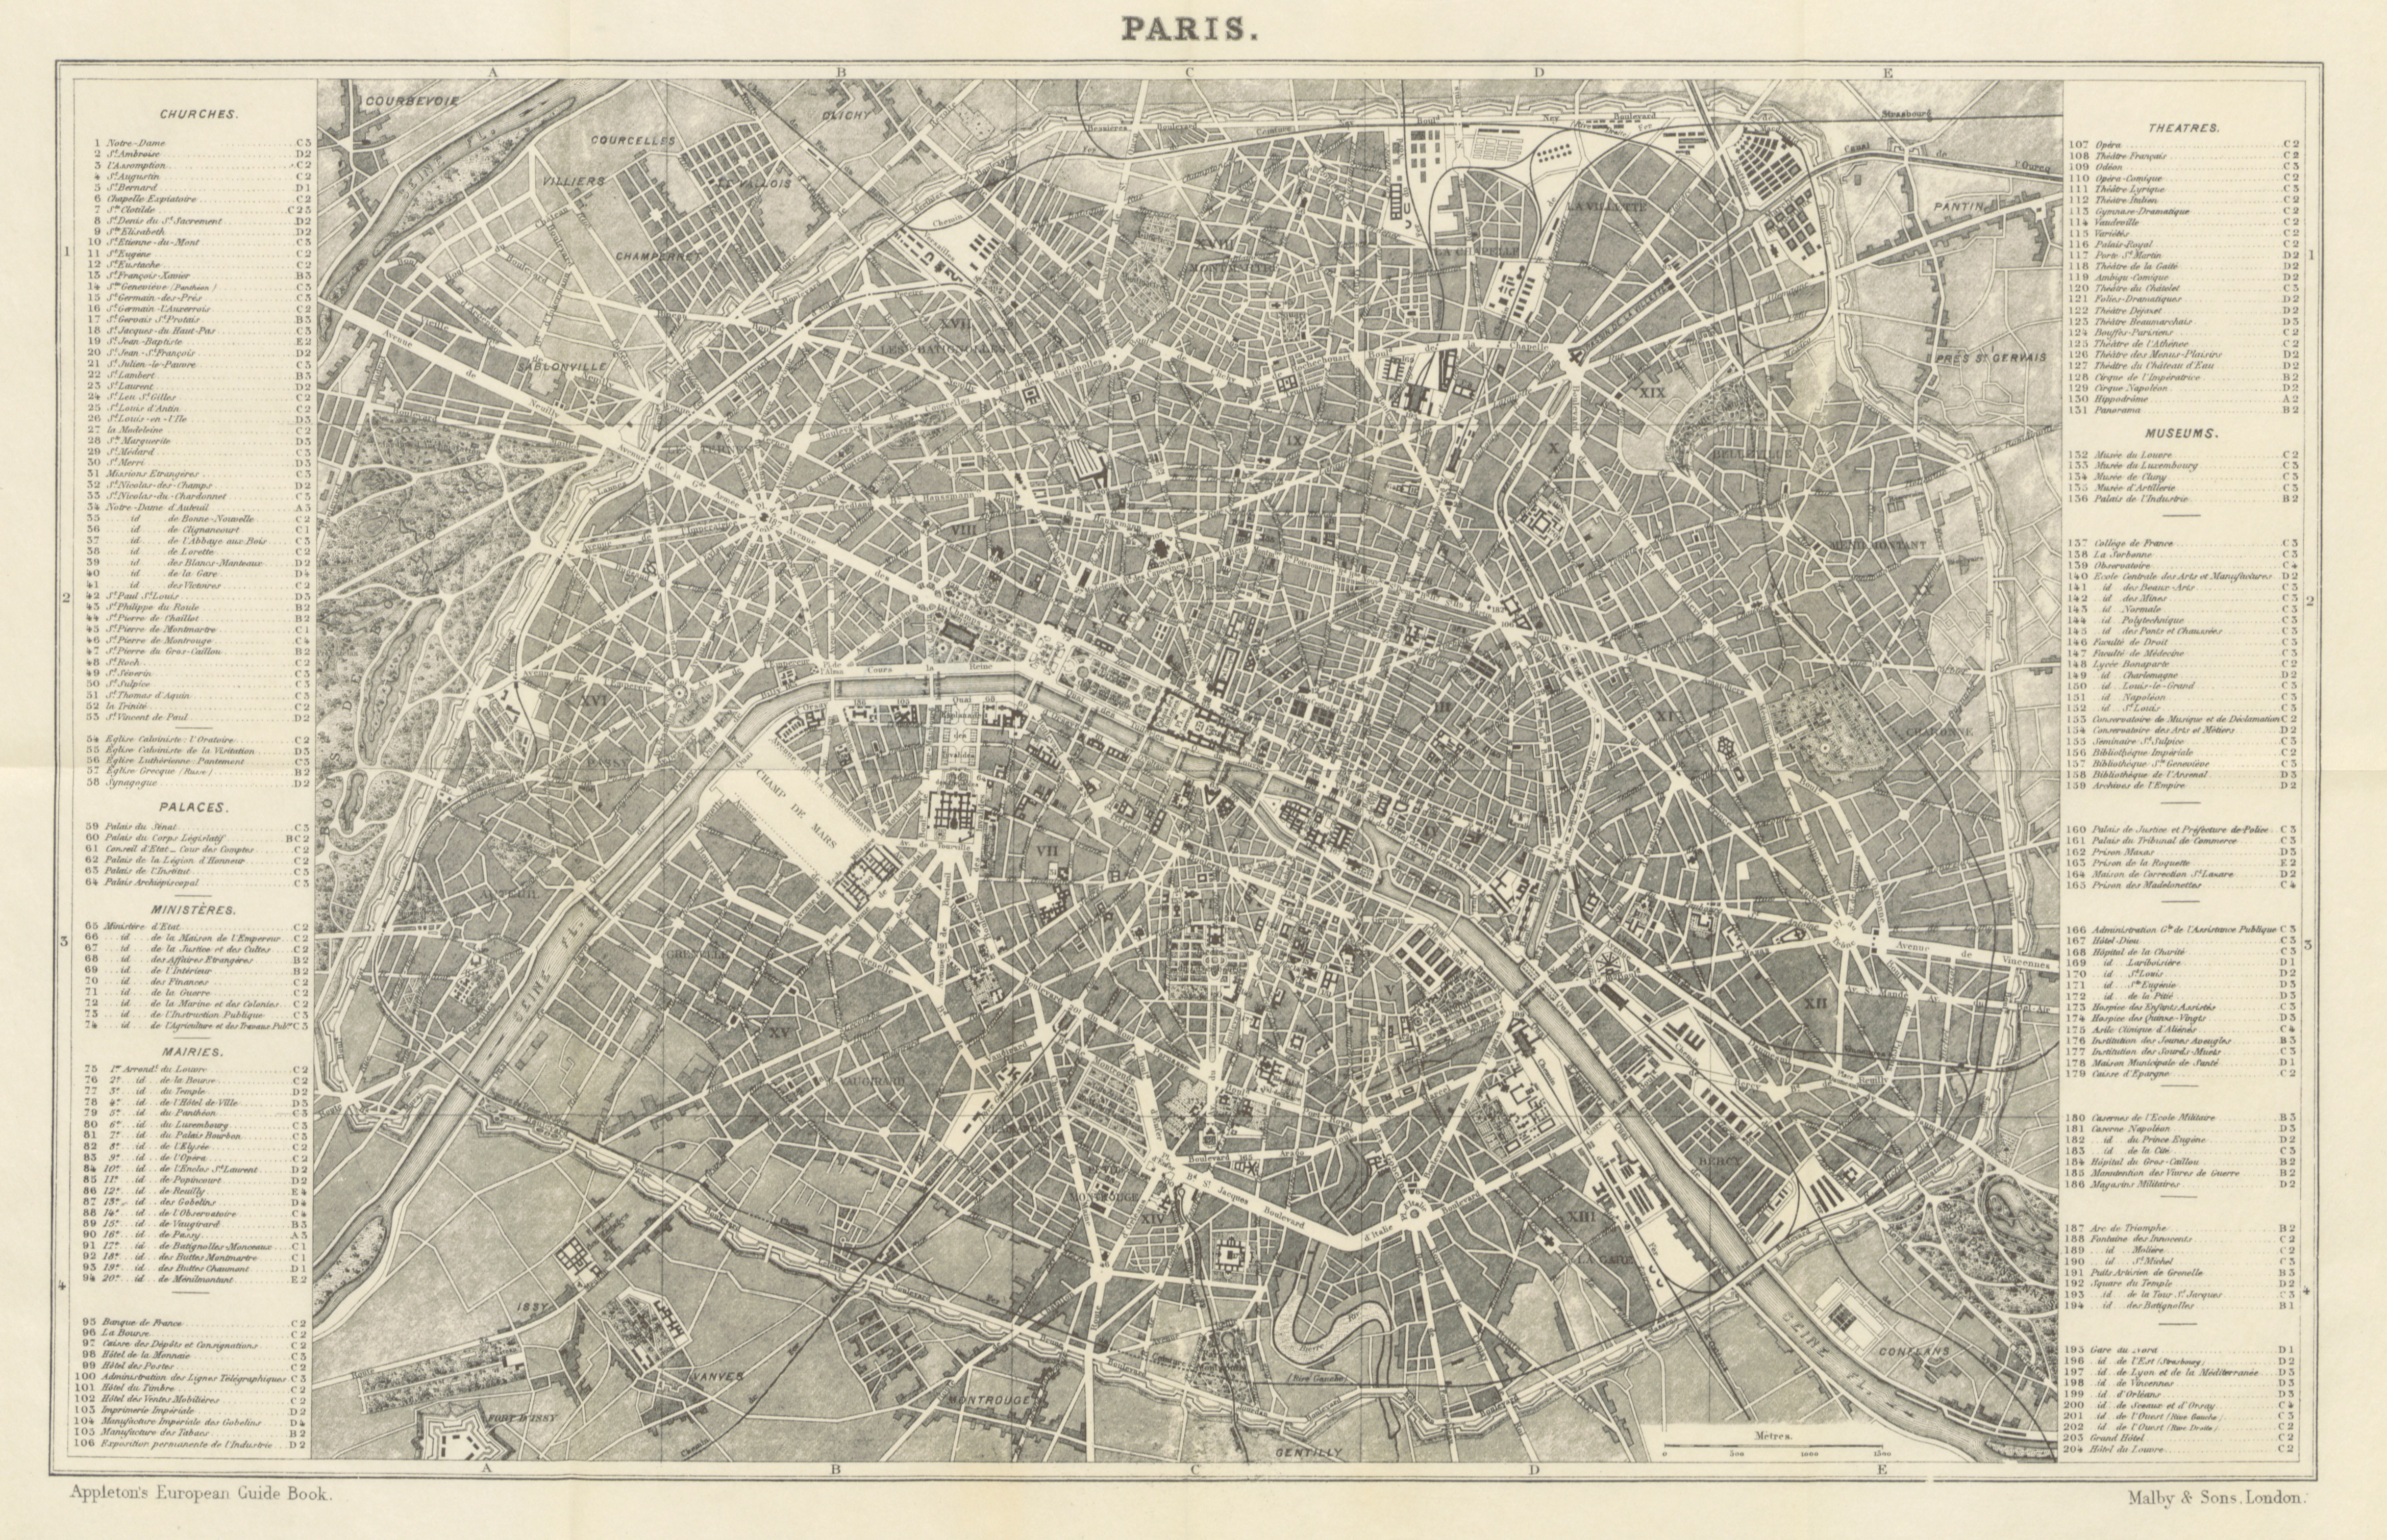 map-of-paris-from-appletons-european-guide-book-illustrated-london-1872--british-library-board